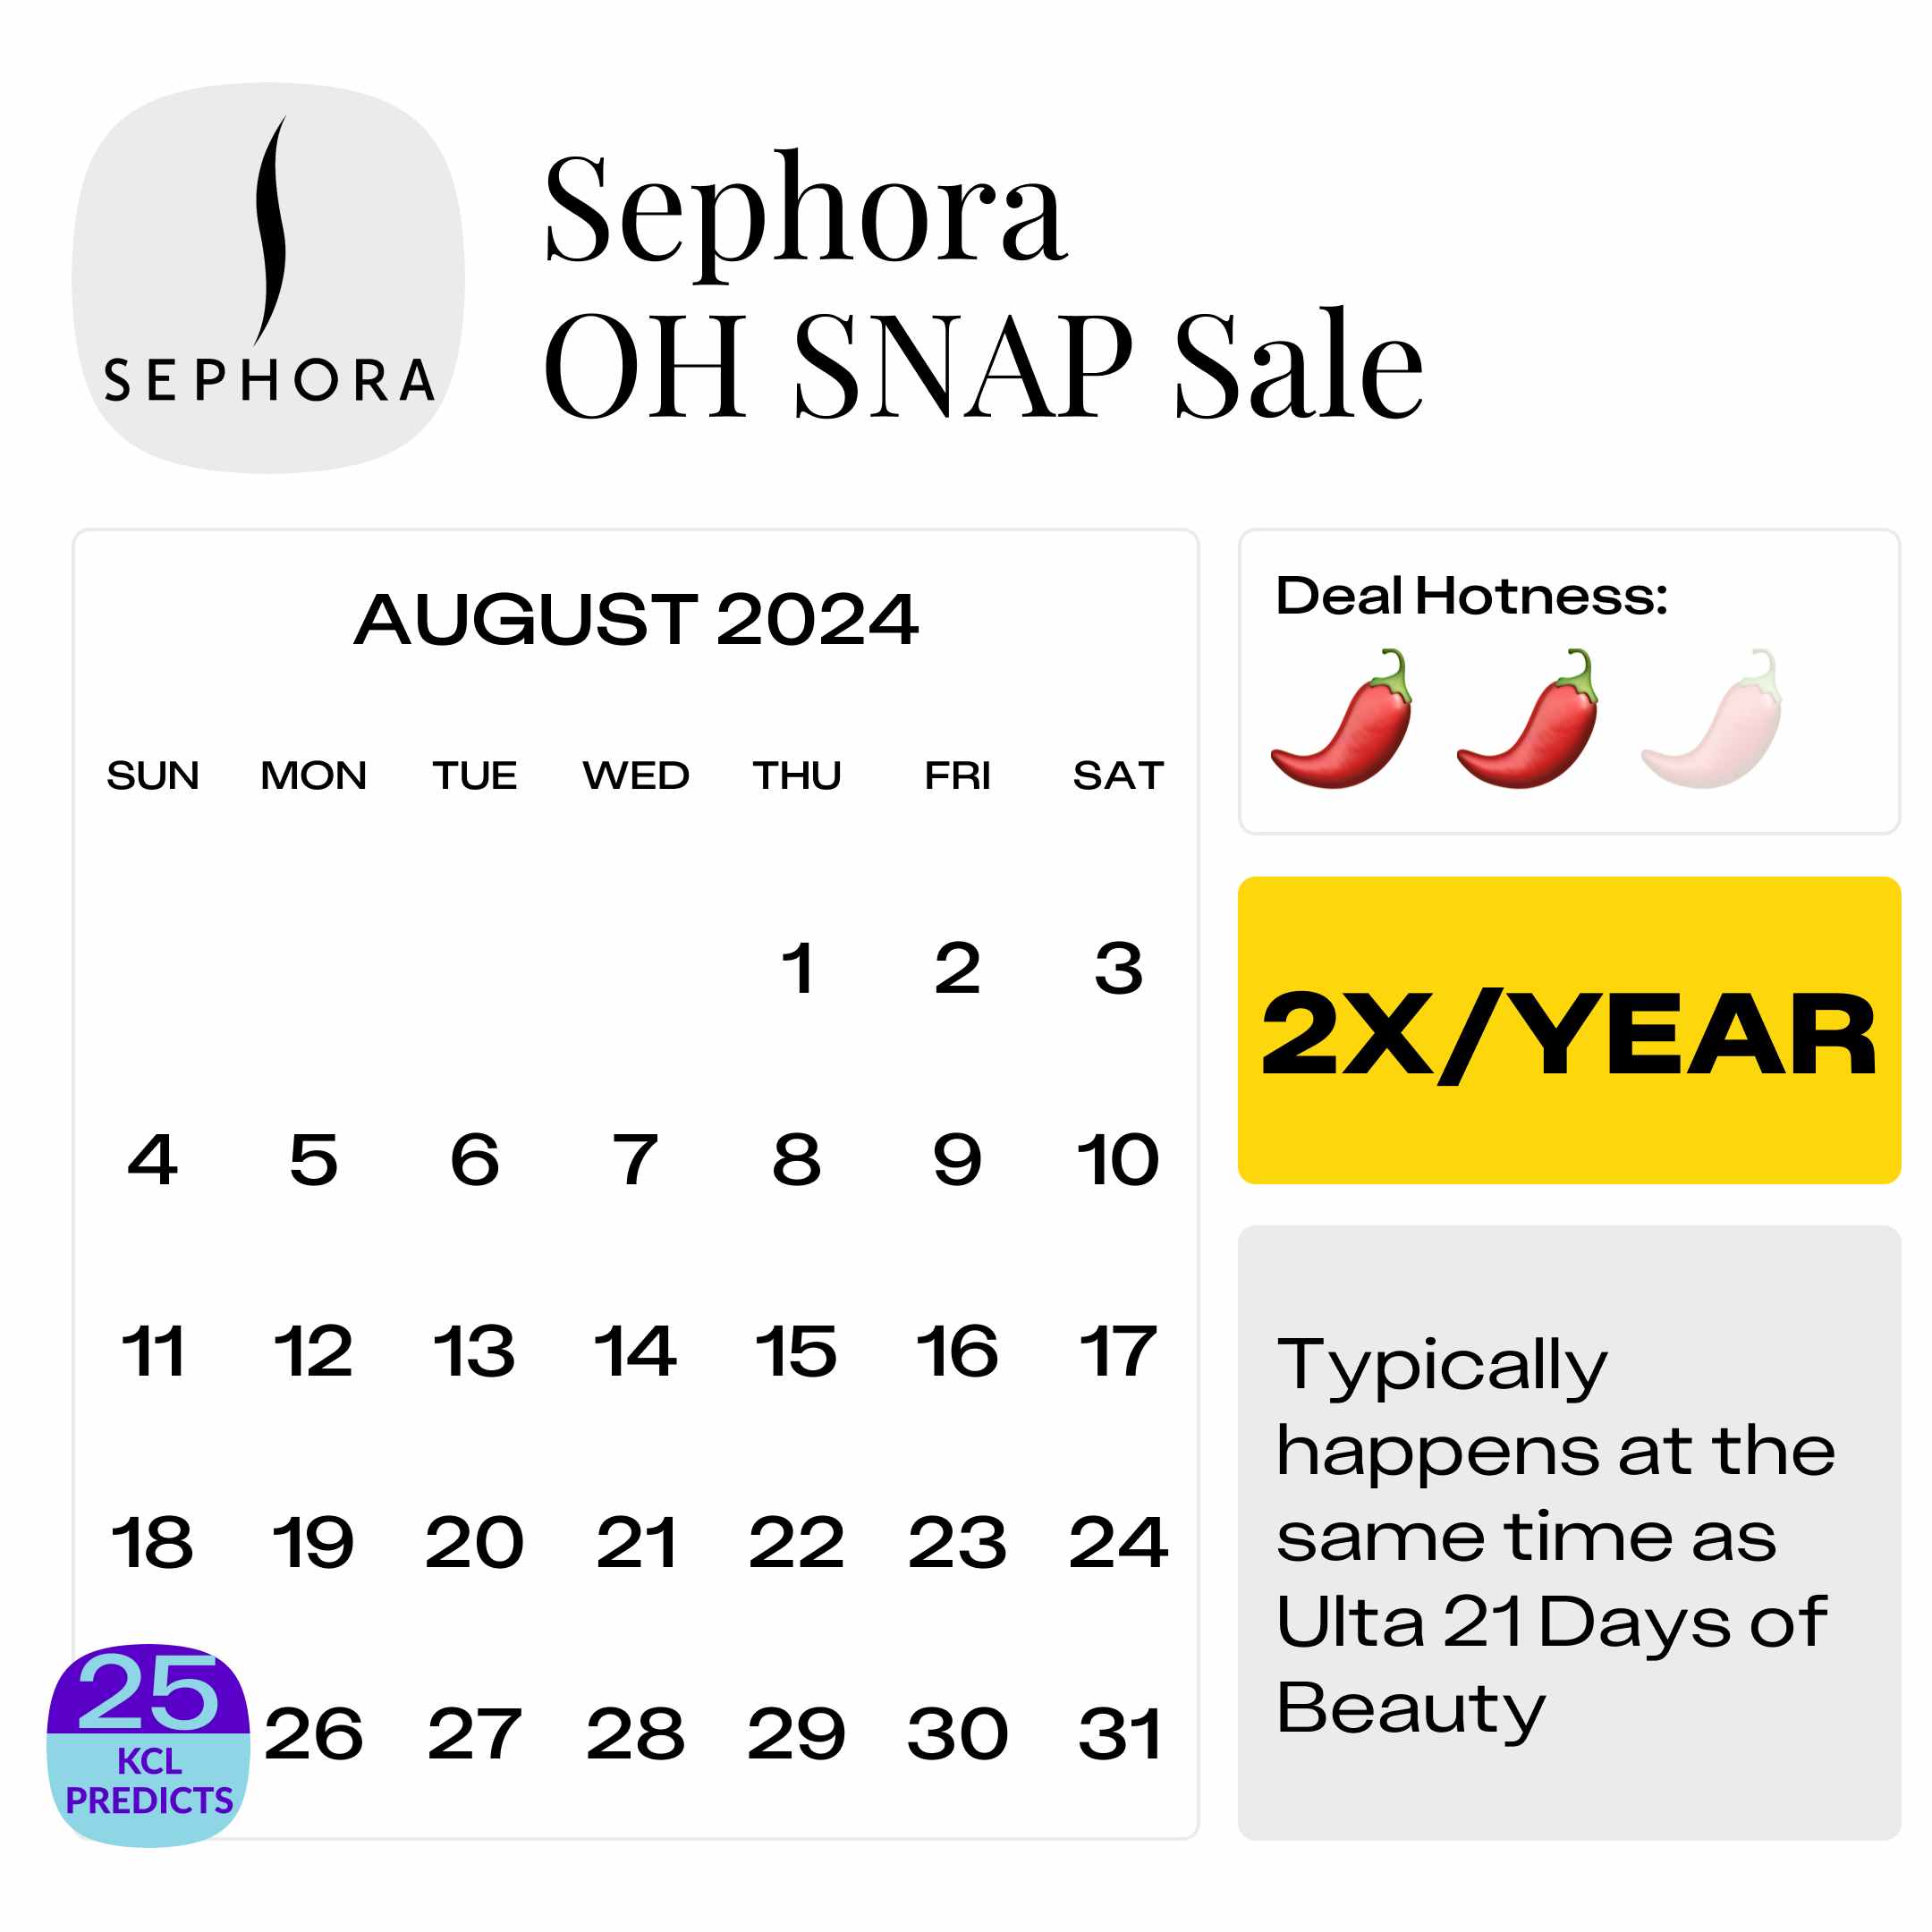 Sephora-Oh-Snap-Sale-2024-predicted